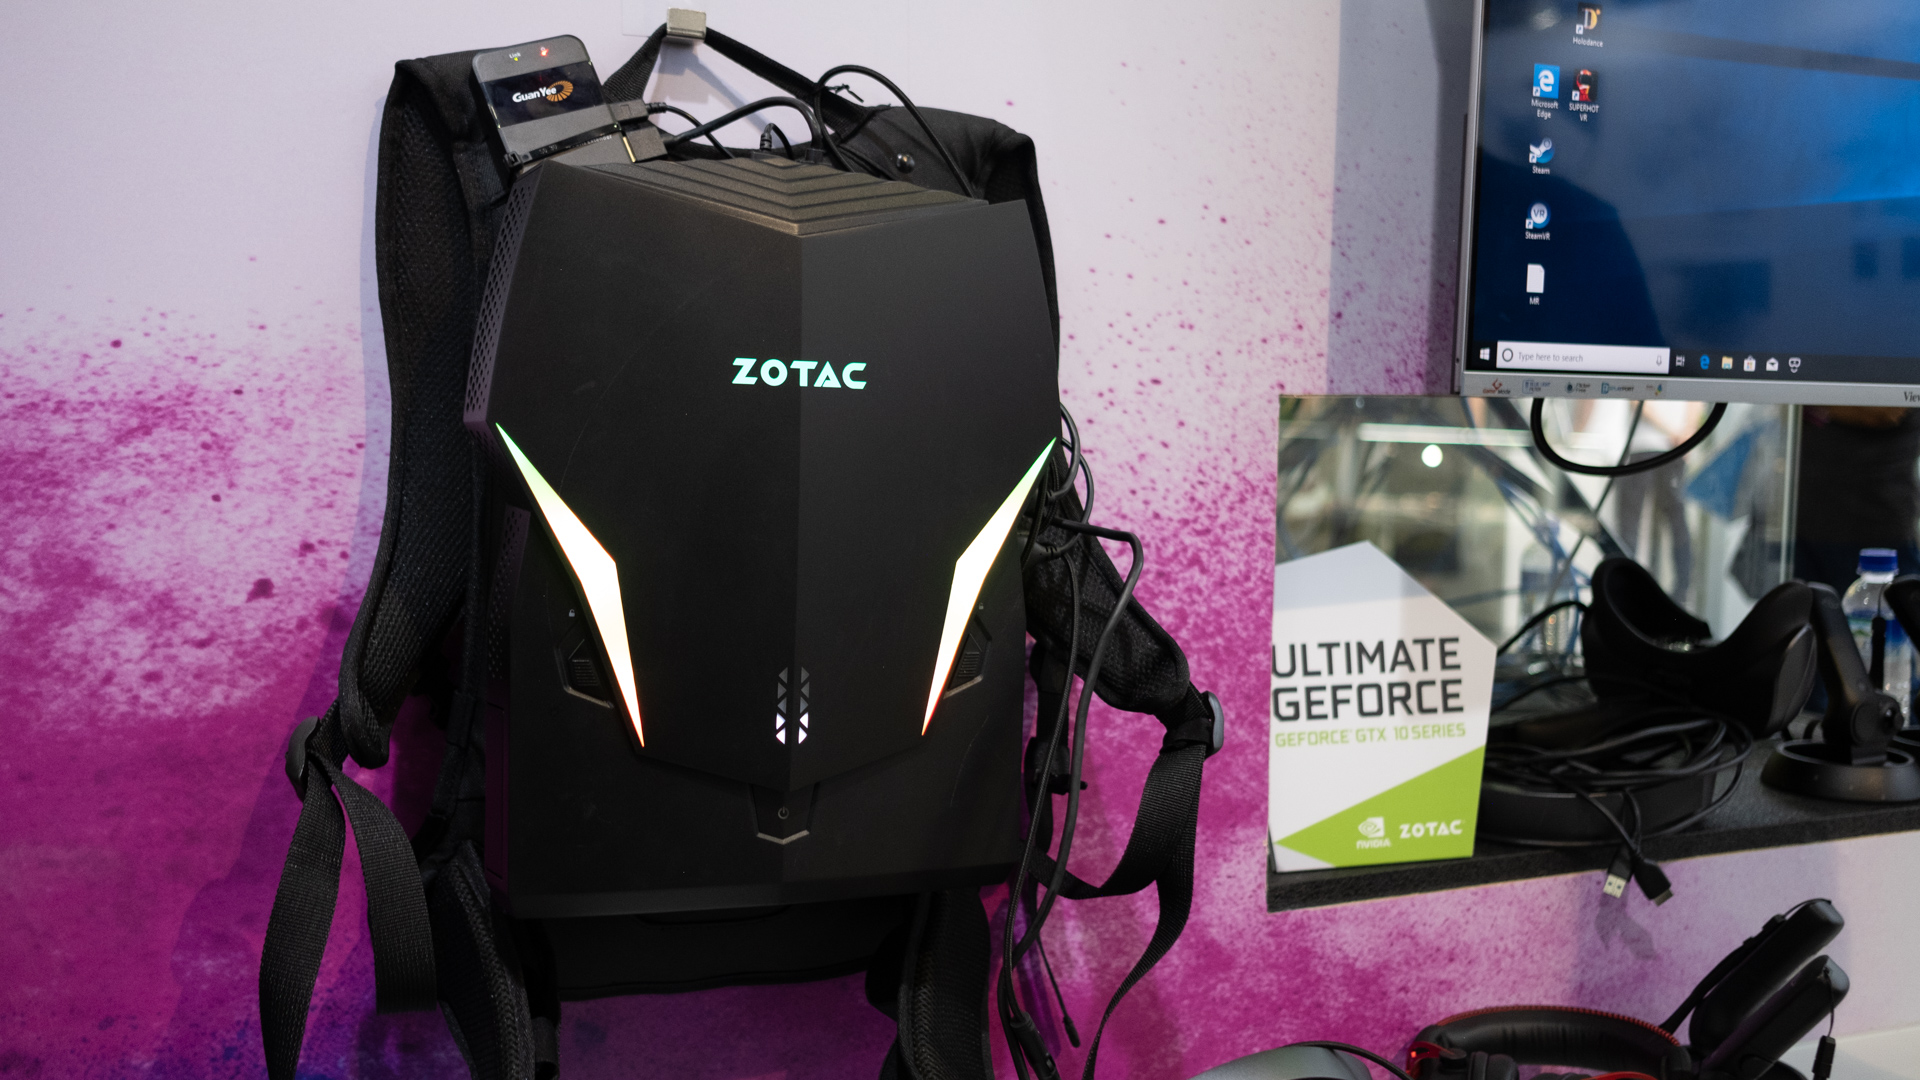 Hands-on with Zotac's tiny VR-ready PC